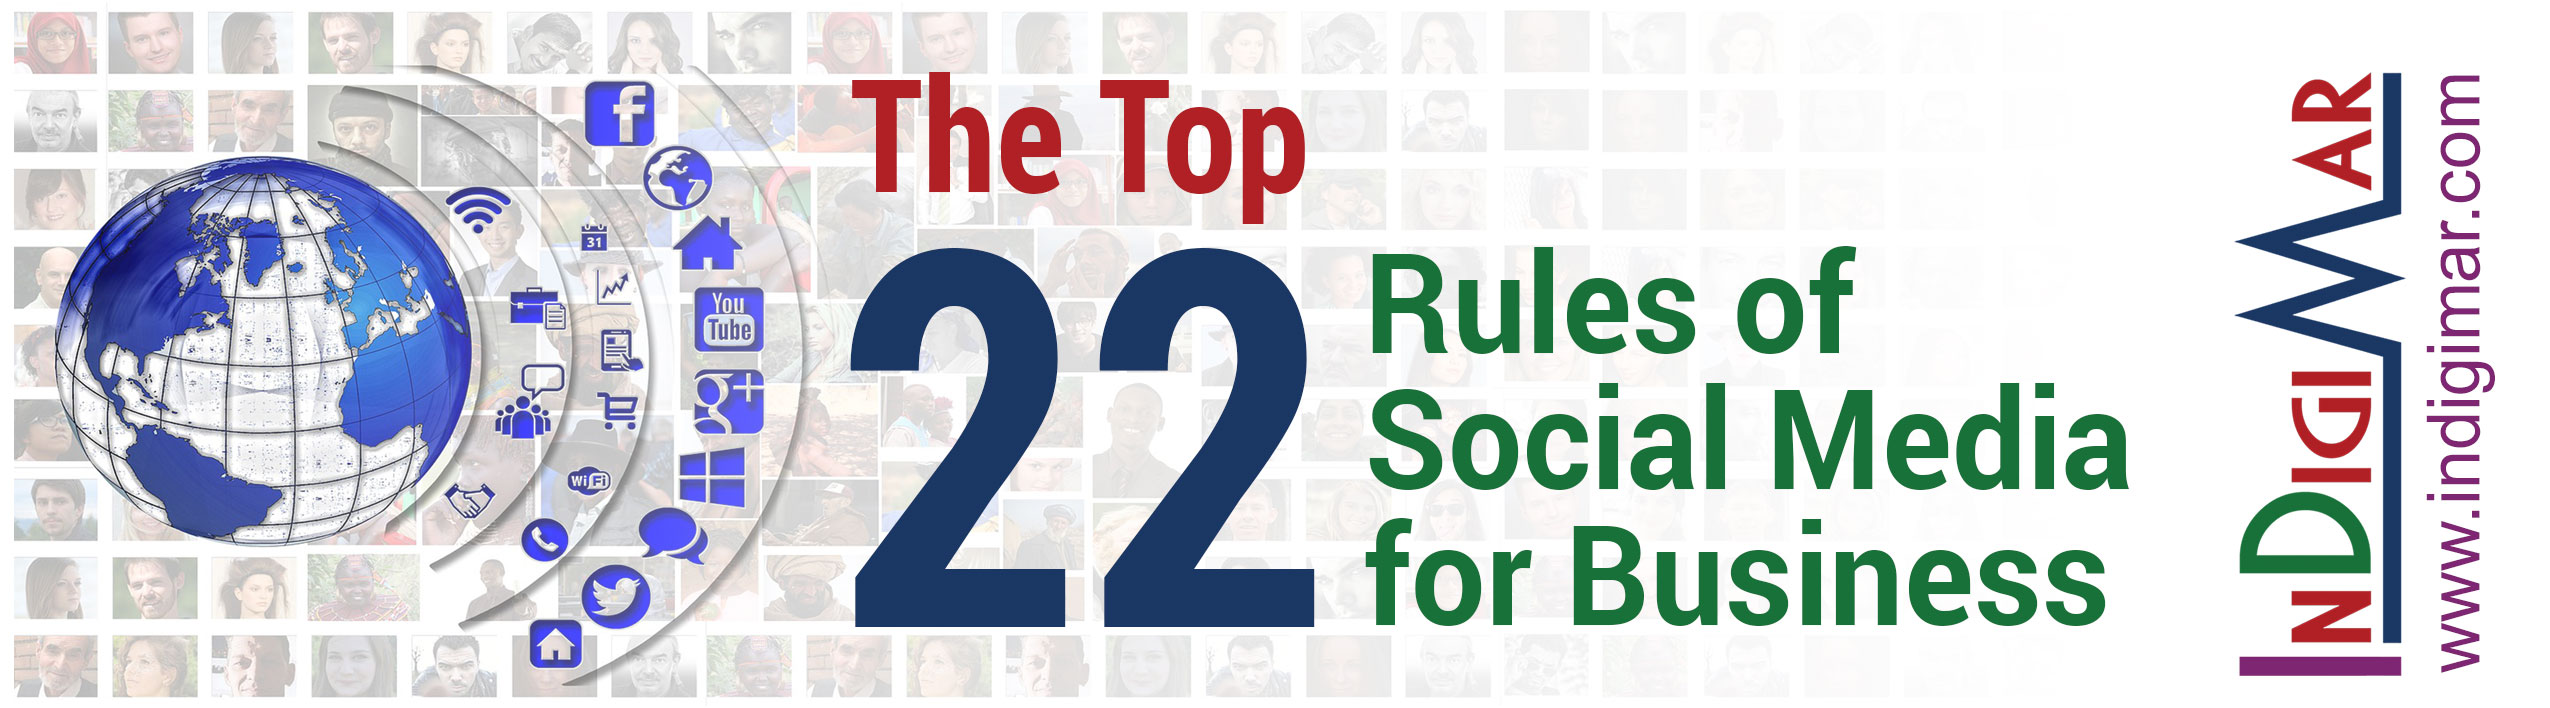 Top 22 Rules of Social Media for Business